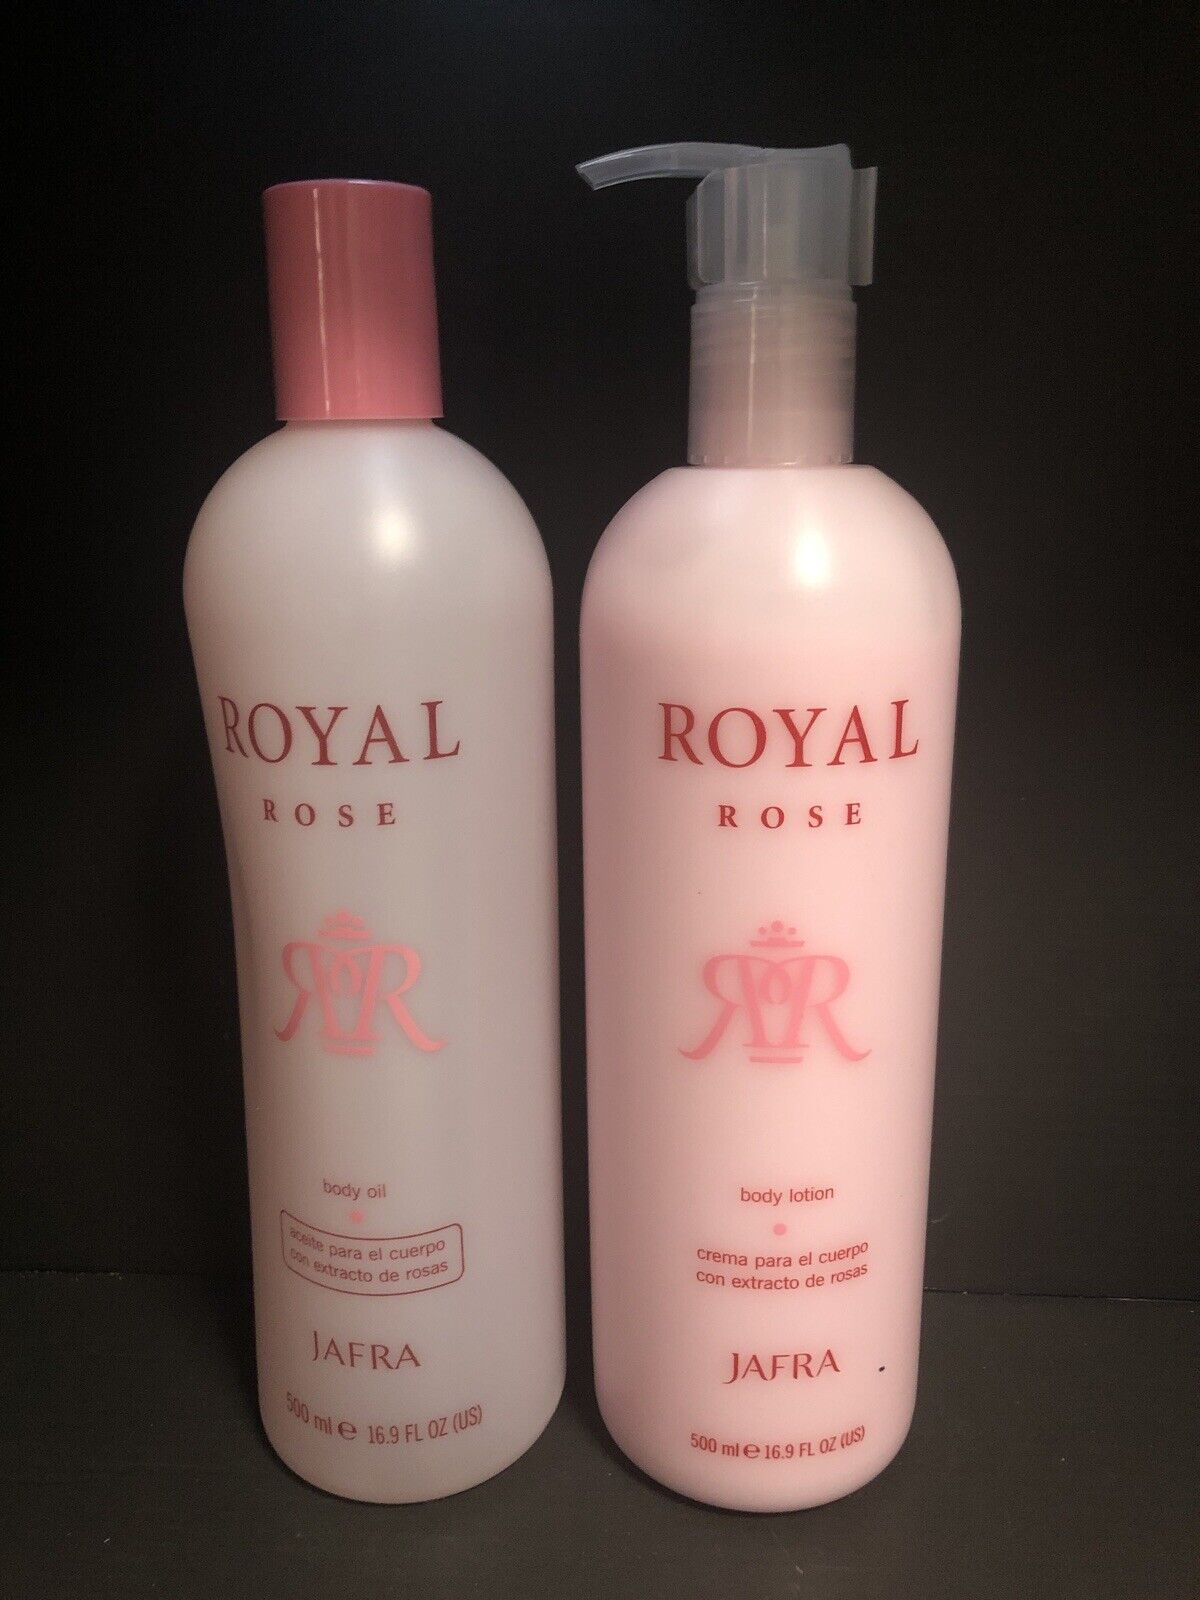 Jafra Royal Rose Body Lotion and 500ml P Oil Store 16.9oz Duo Super special price Set